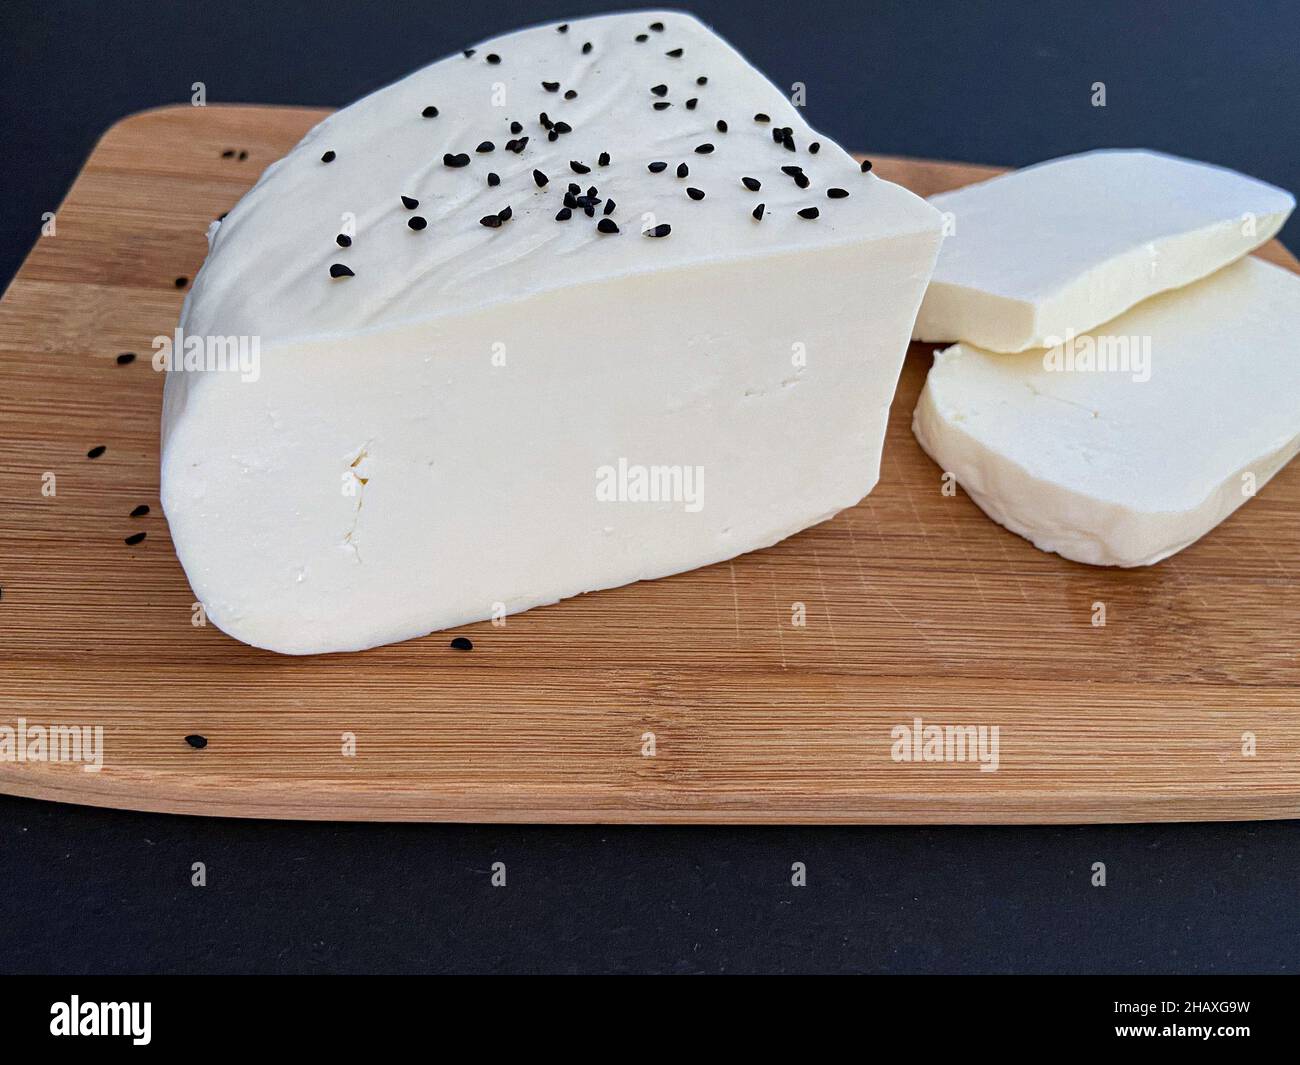 White cheese, cheese slices on a wooden plate with black background. Stock Photo